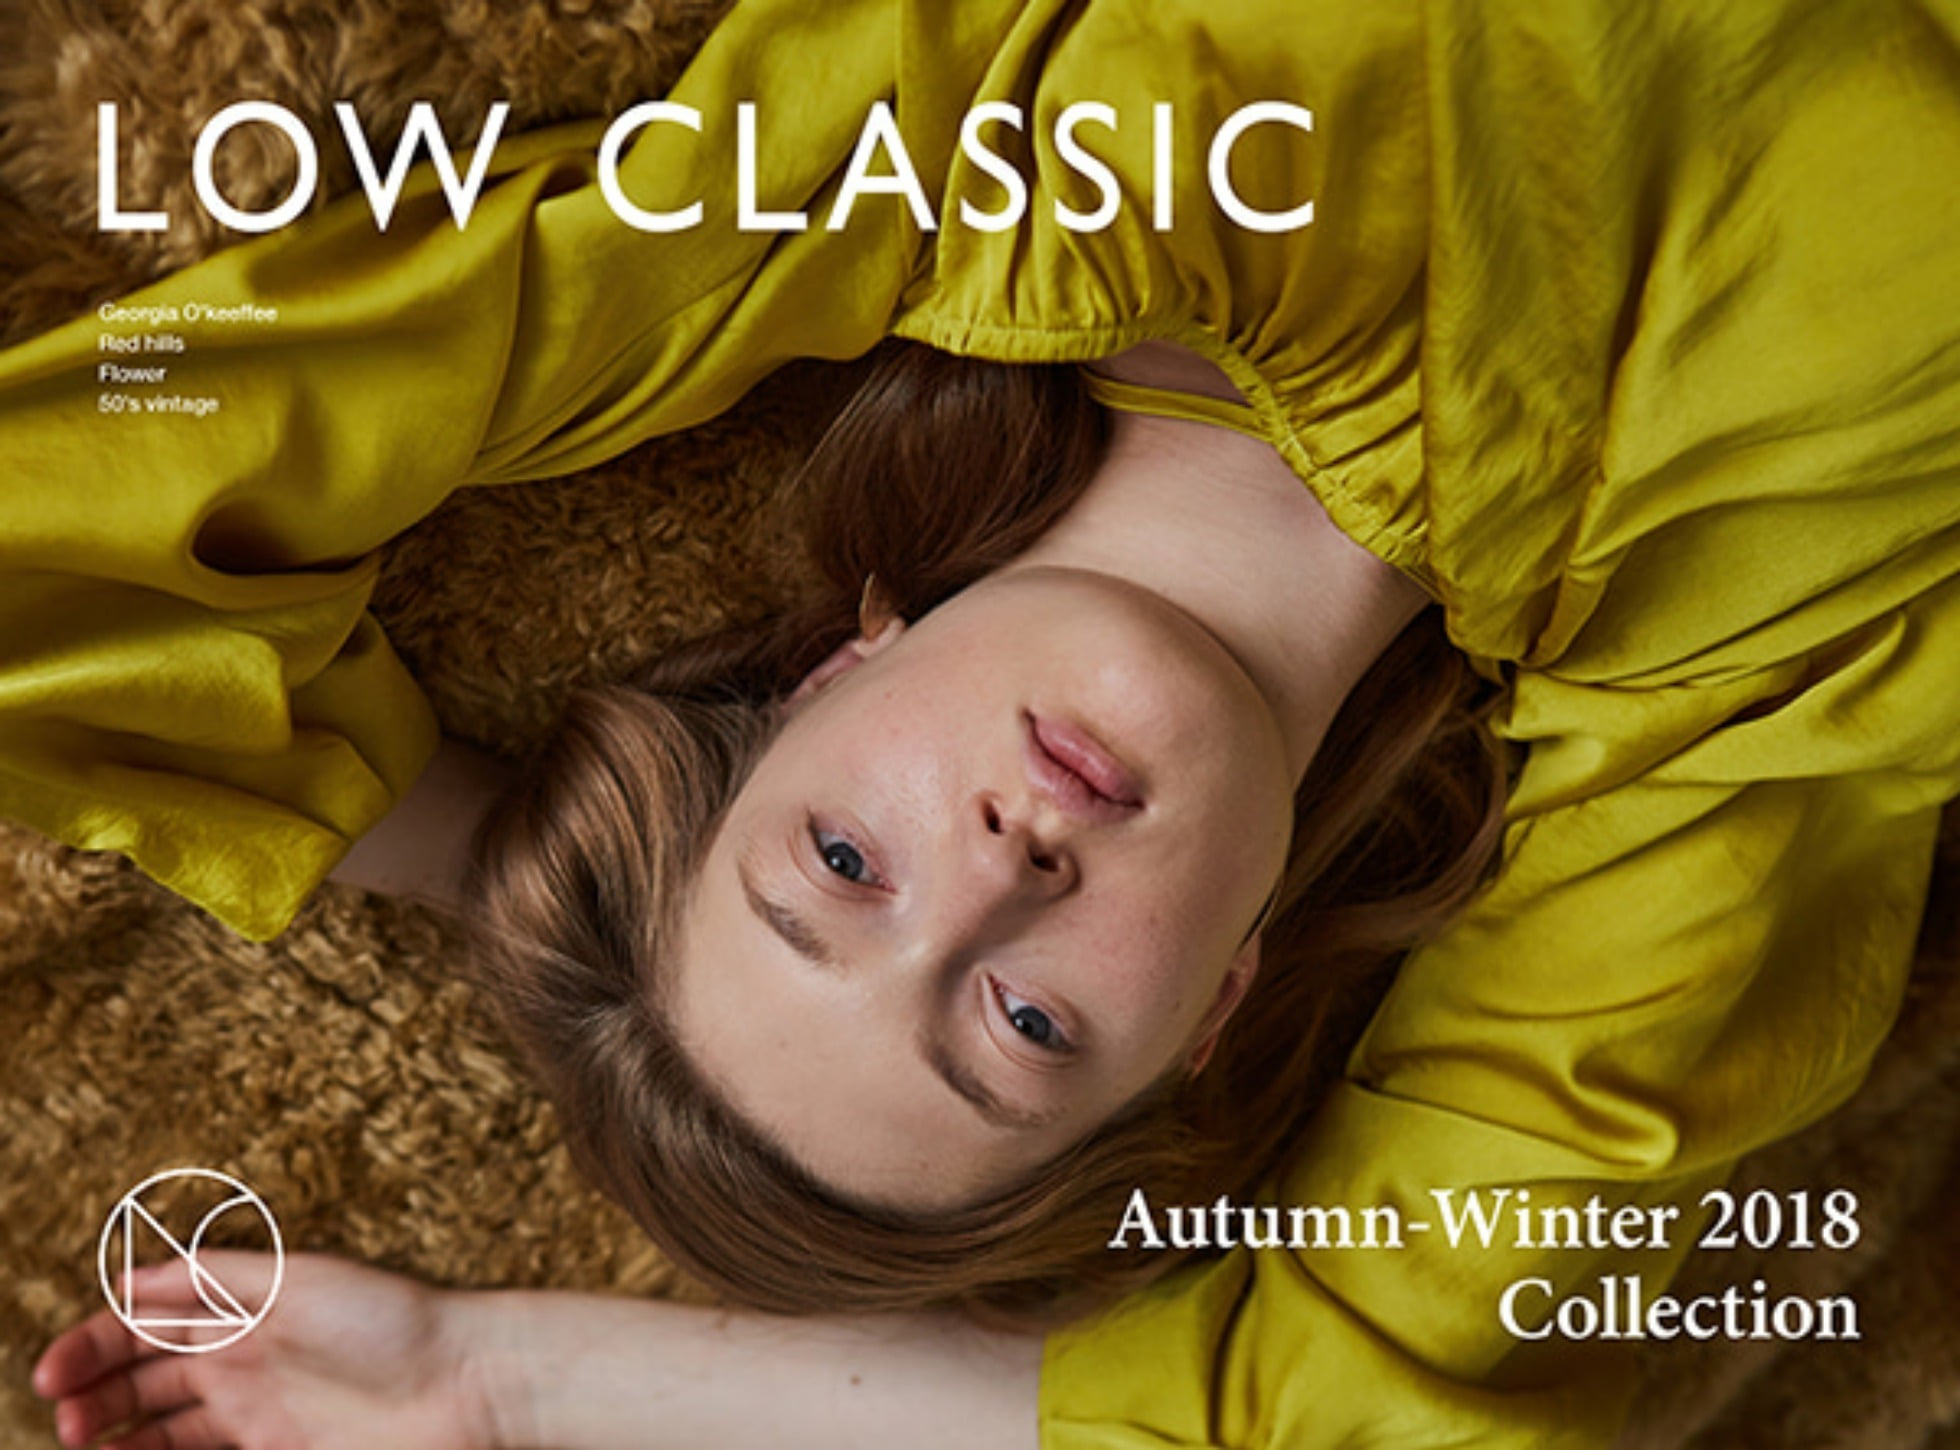 Autumn-Winter 2018 Collection LOW CLASSIC